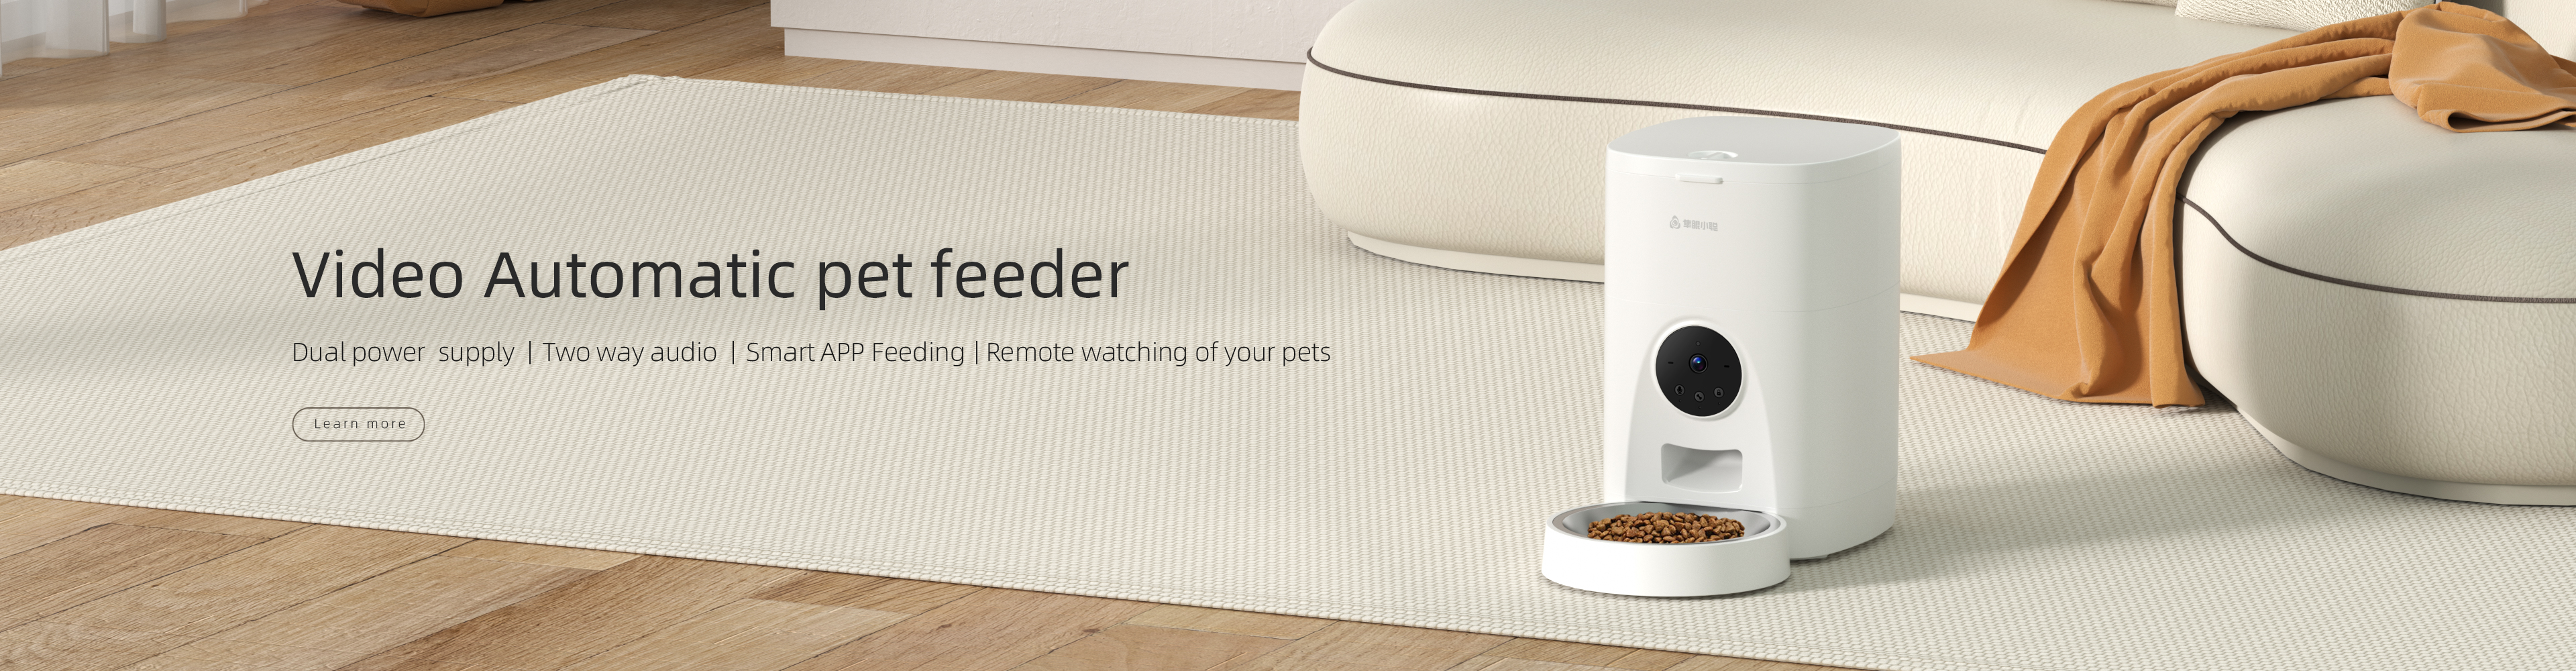 video automatic pet feeder